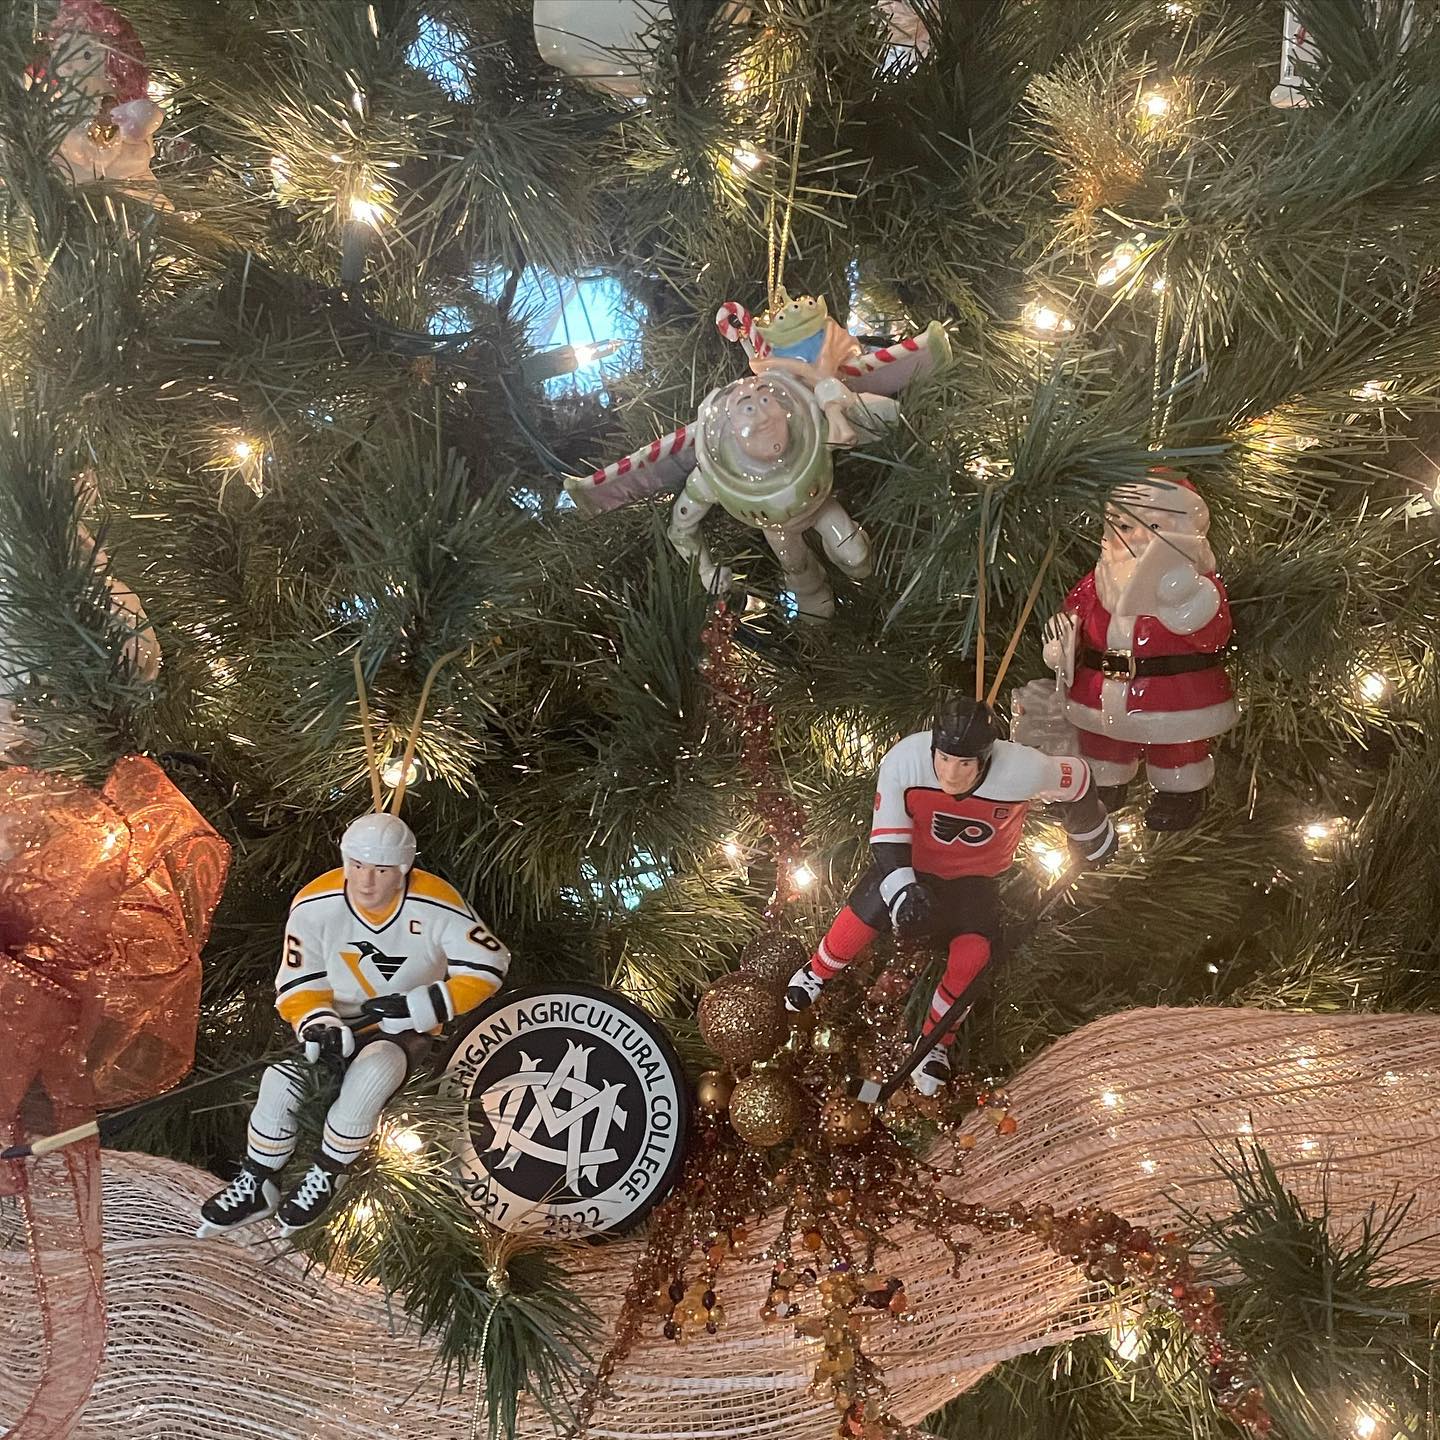 Merry Christmas from all of us at MSU ACHA Hockey. May all your holiday wishes come true!

pc: @torreymschwartz